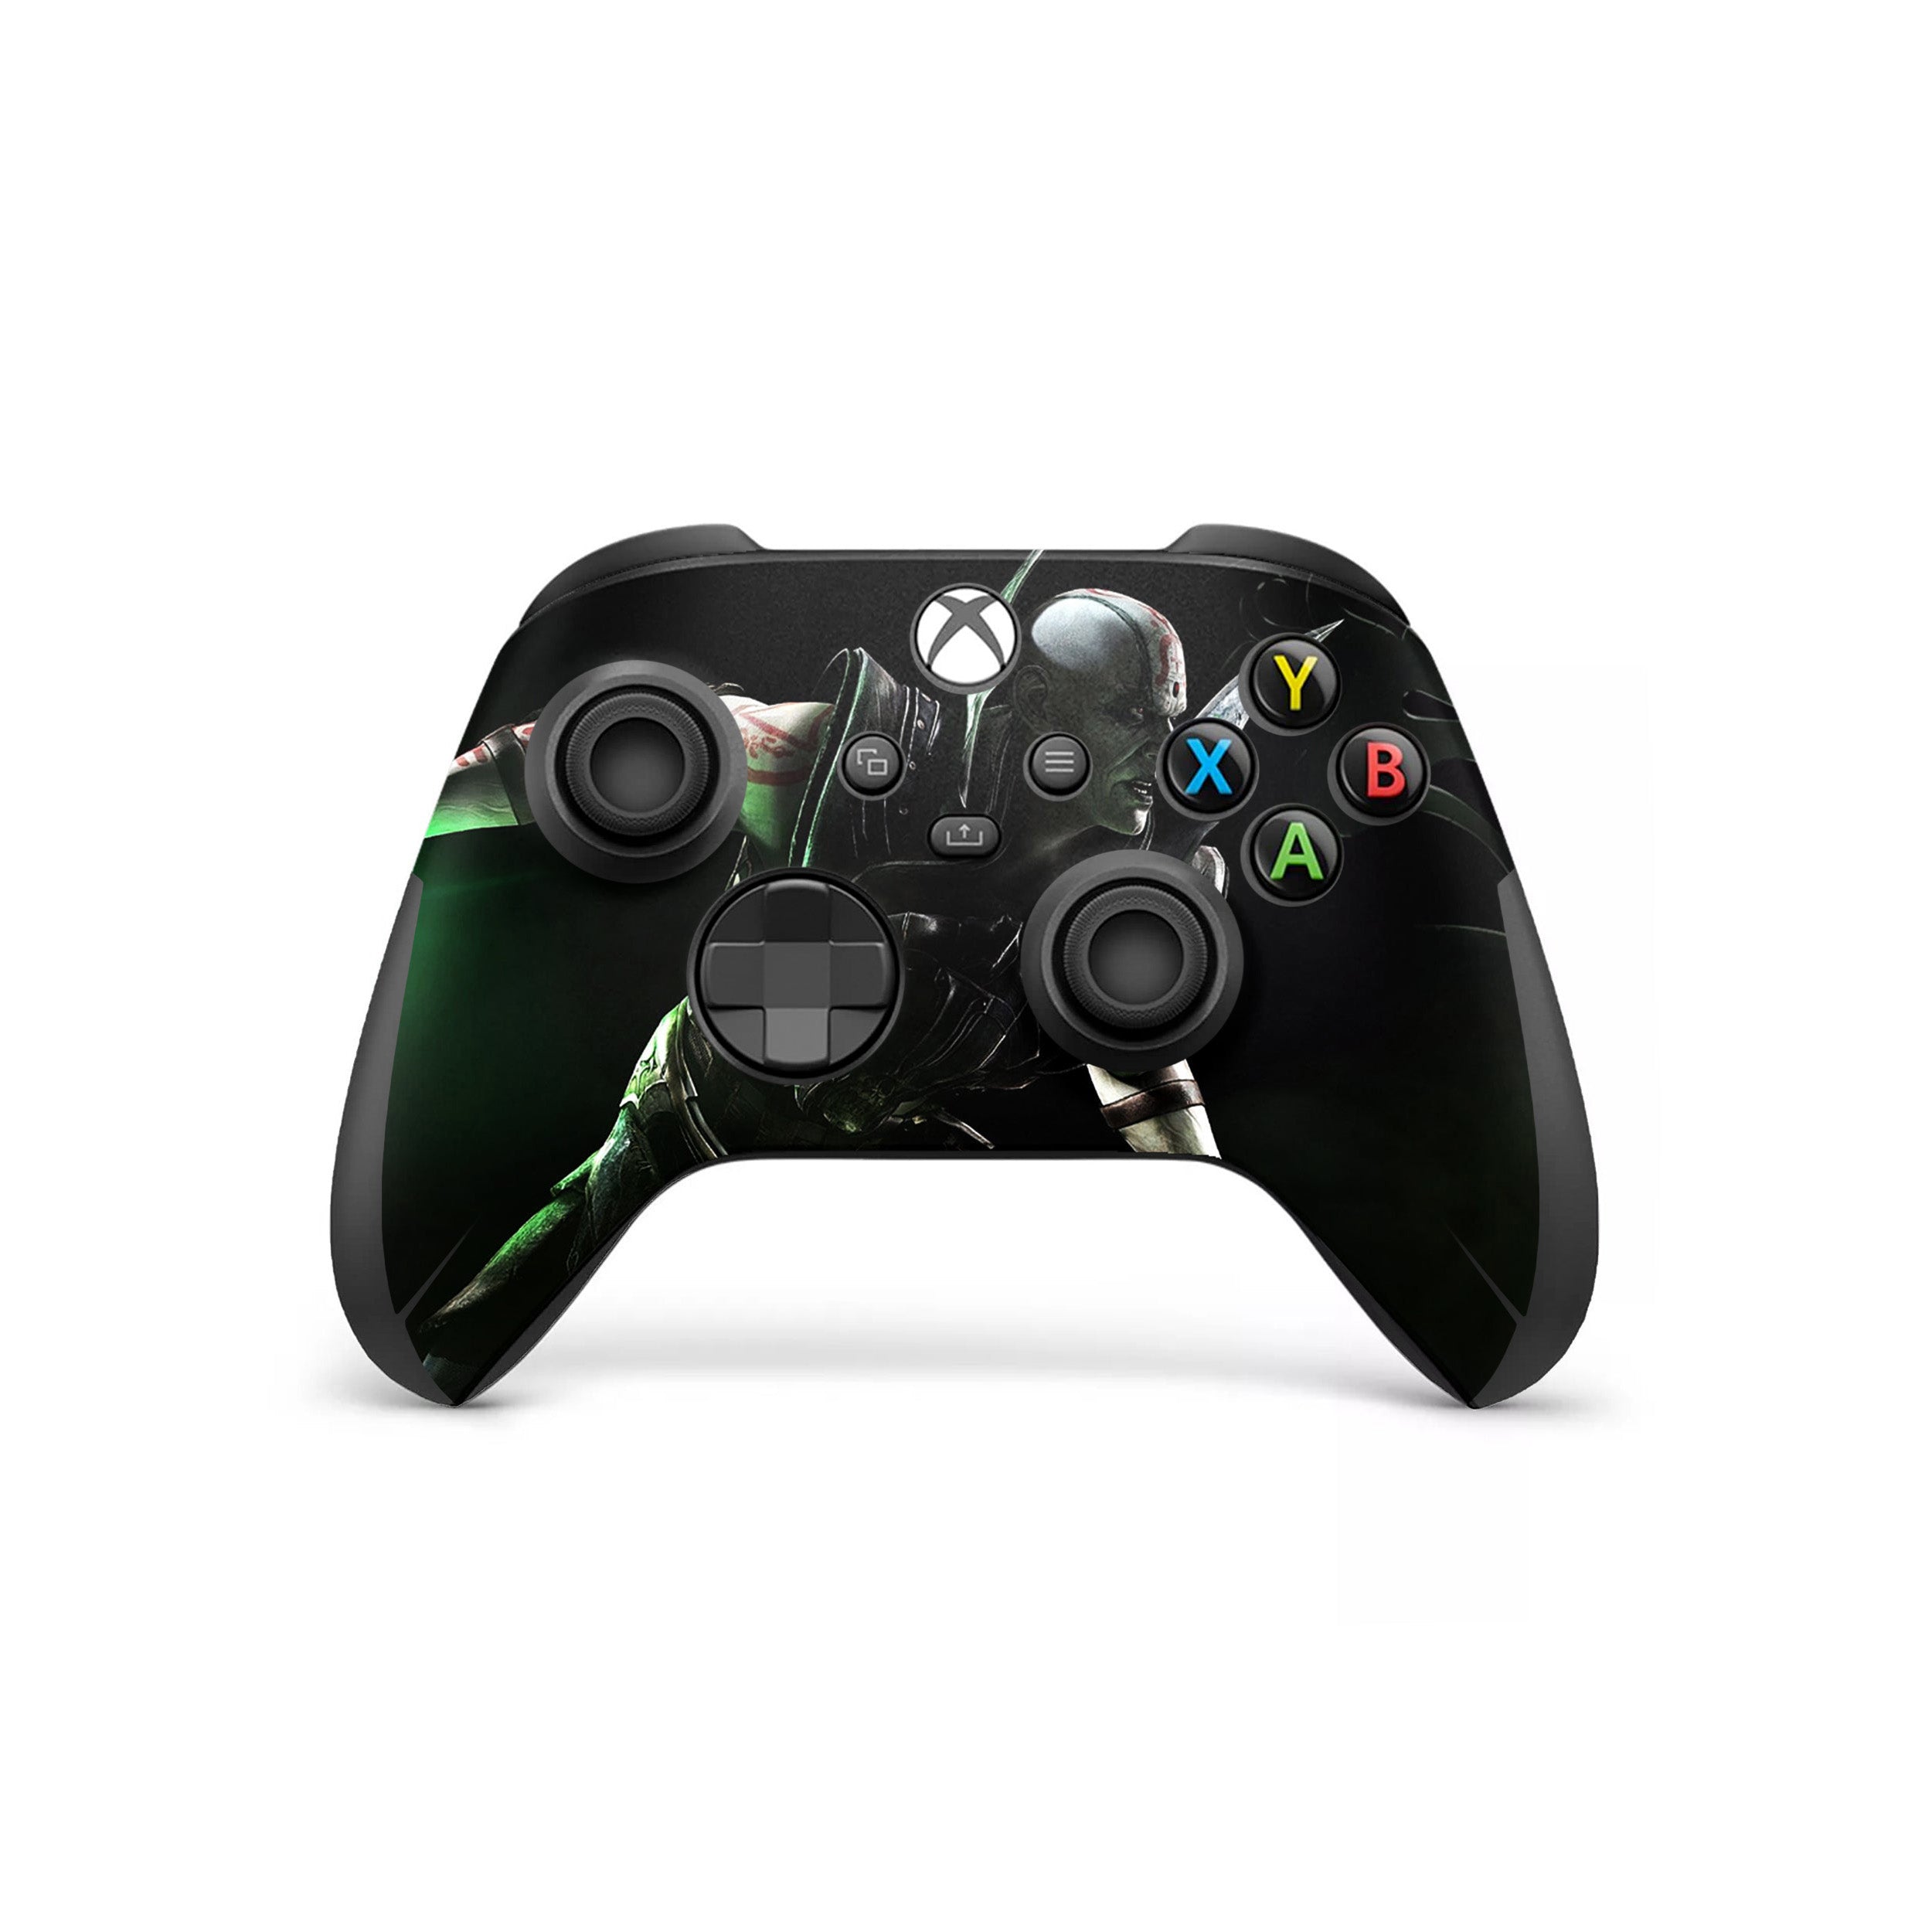 A video game skin featuring a Mortal Kombat Quan Chi design for the Xbox Wireless Controller.